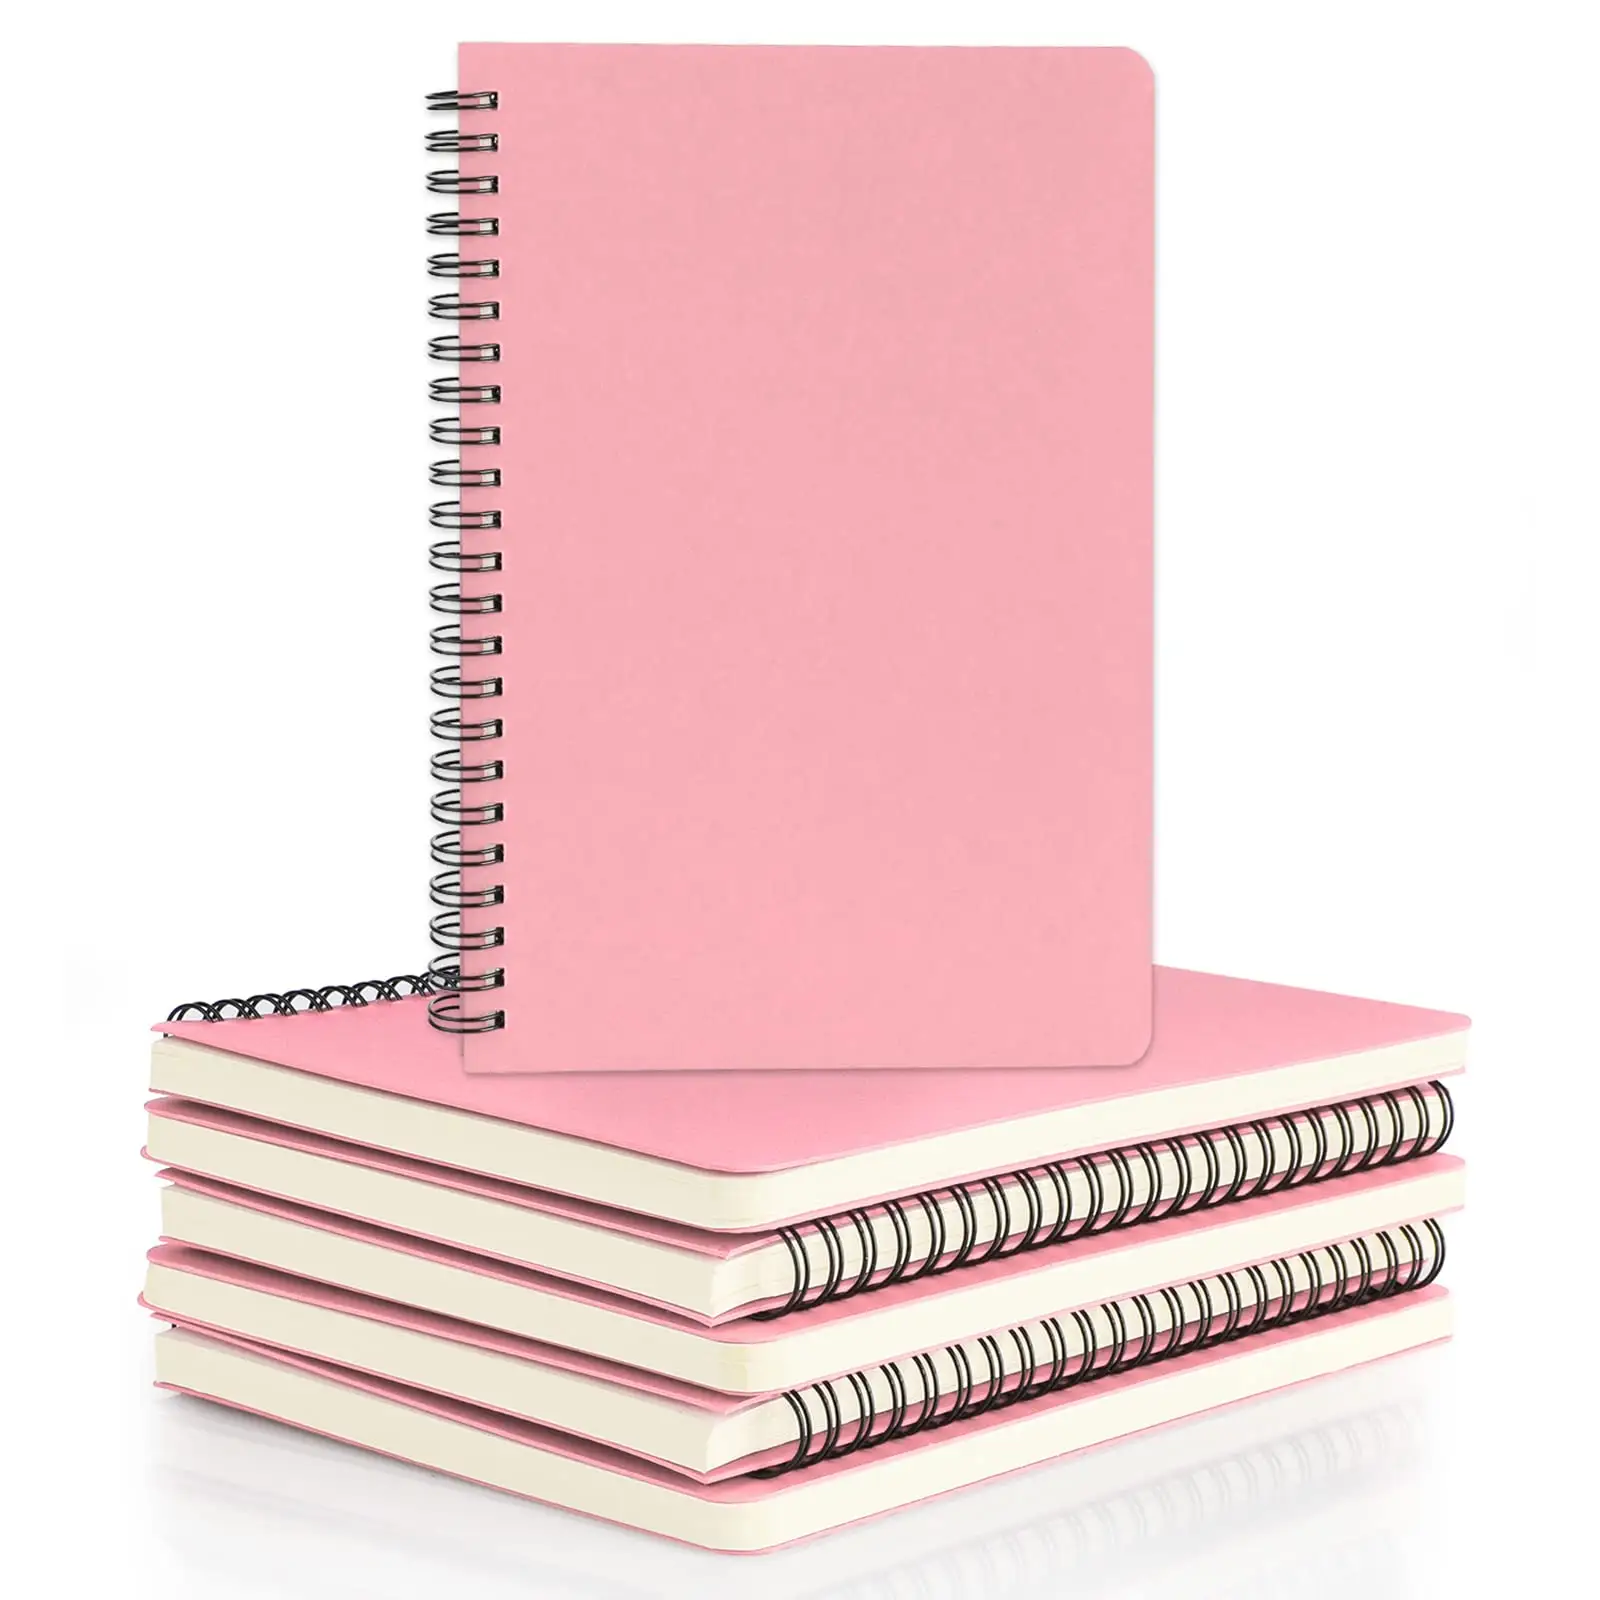 Cuaderno diario con cubierta Rosa personalizable de color A5 College Ruled Paper Business Spiral Journal